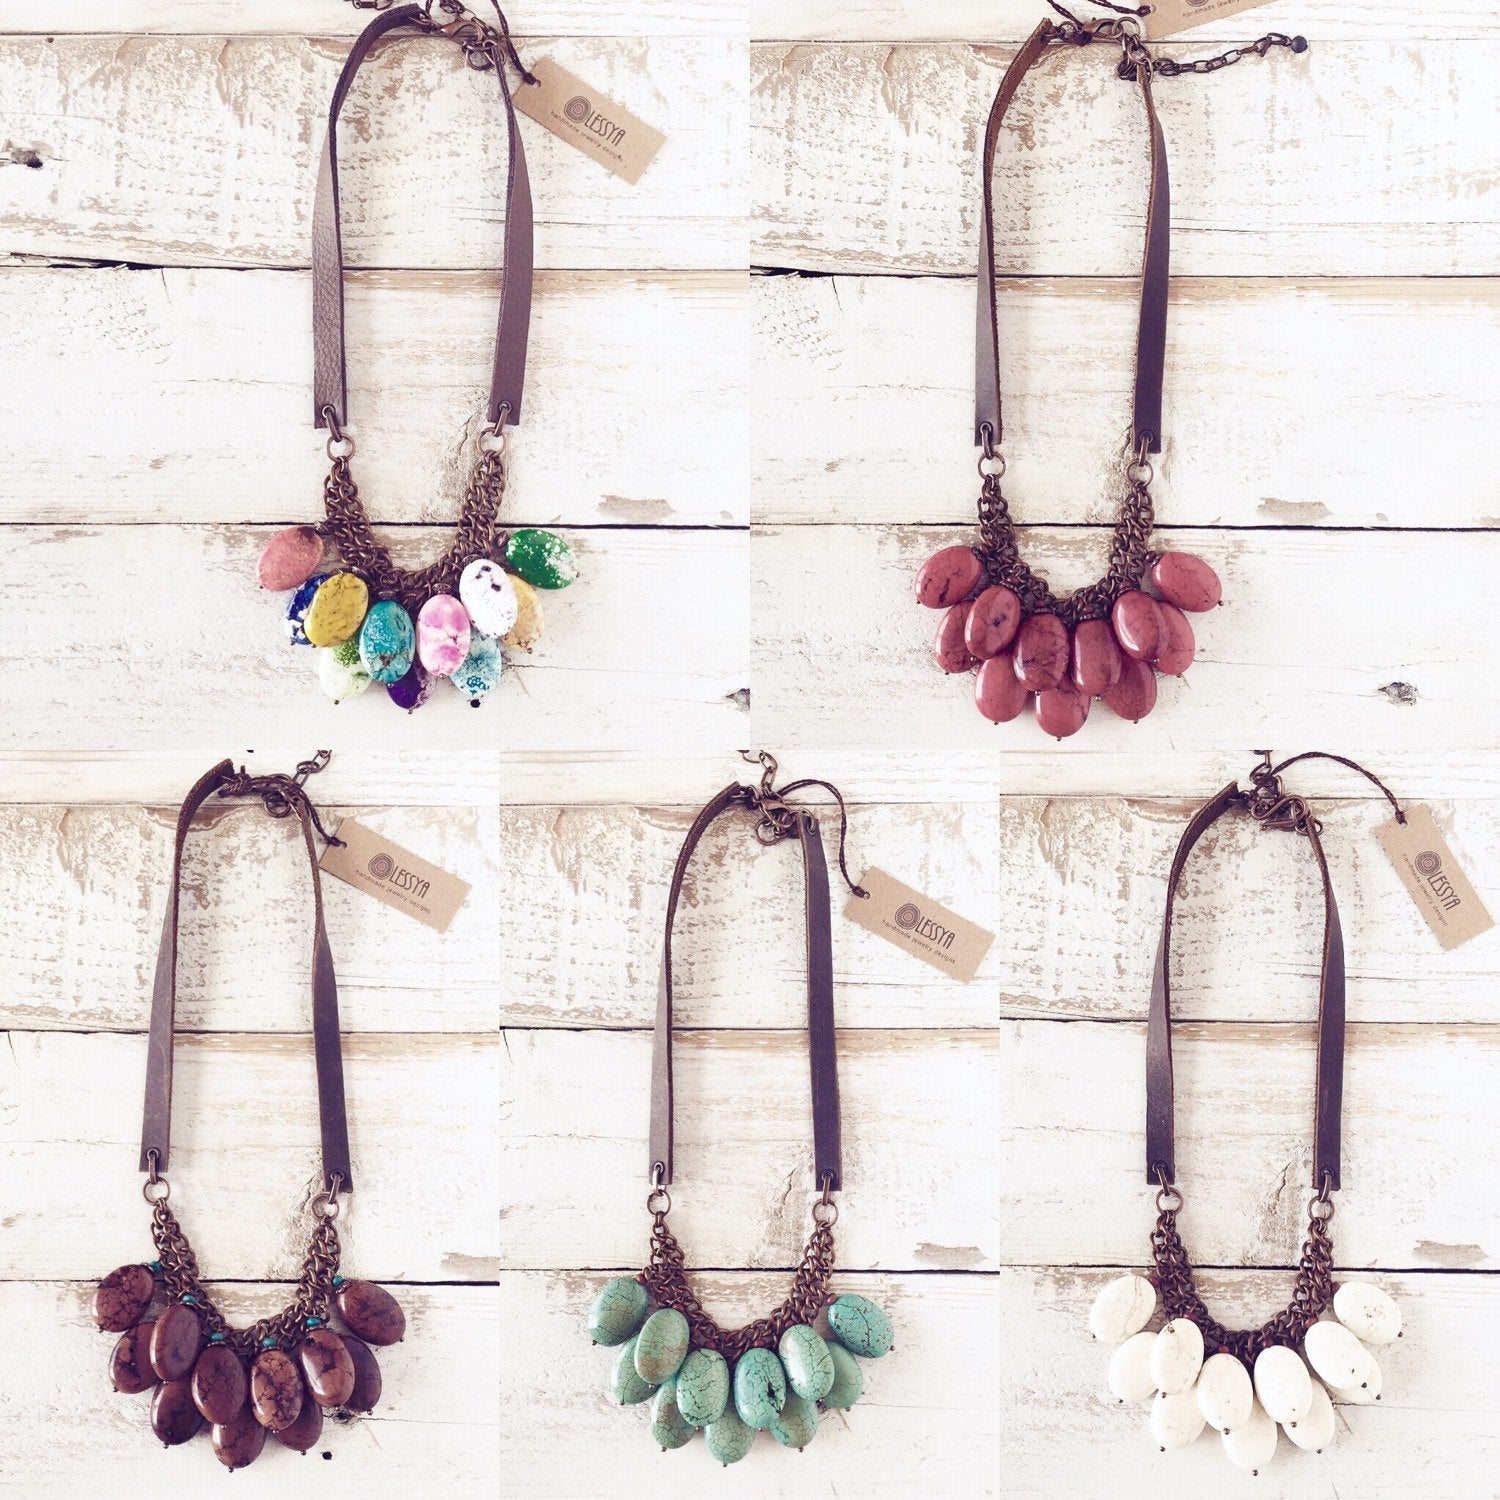 Colorful Stone Necklace, Statement Leather Necklace, Boho Rustic Necklace, Girlfriend Gift Necklace, Multicolor Mom Necklace, N110.1